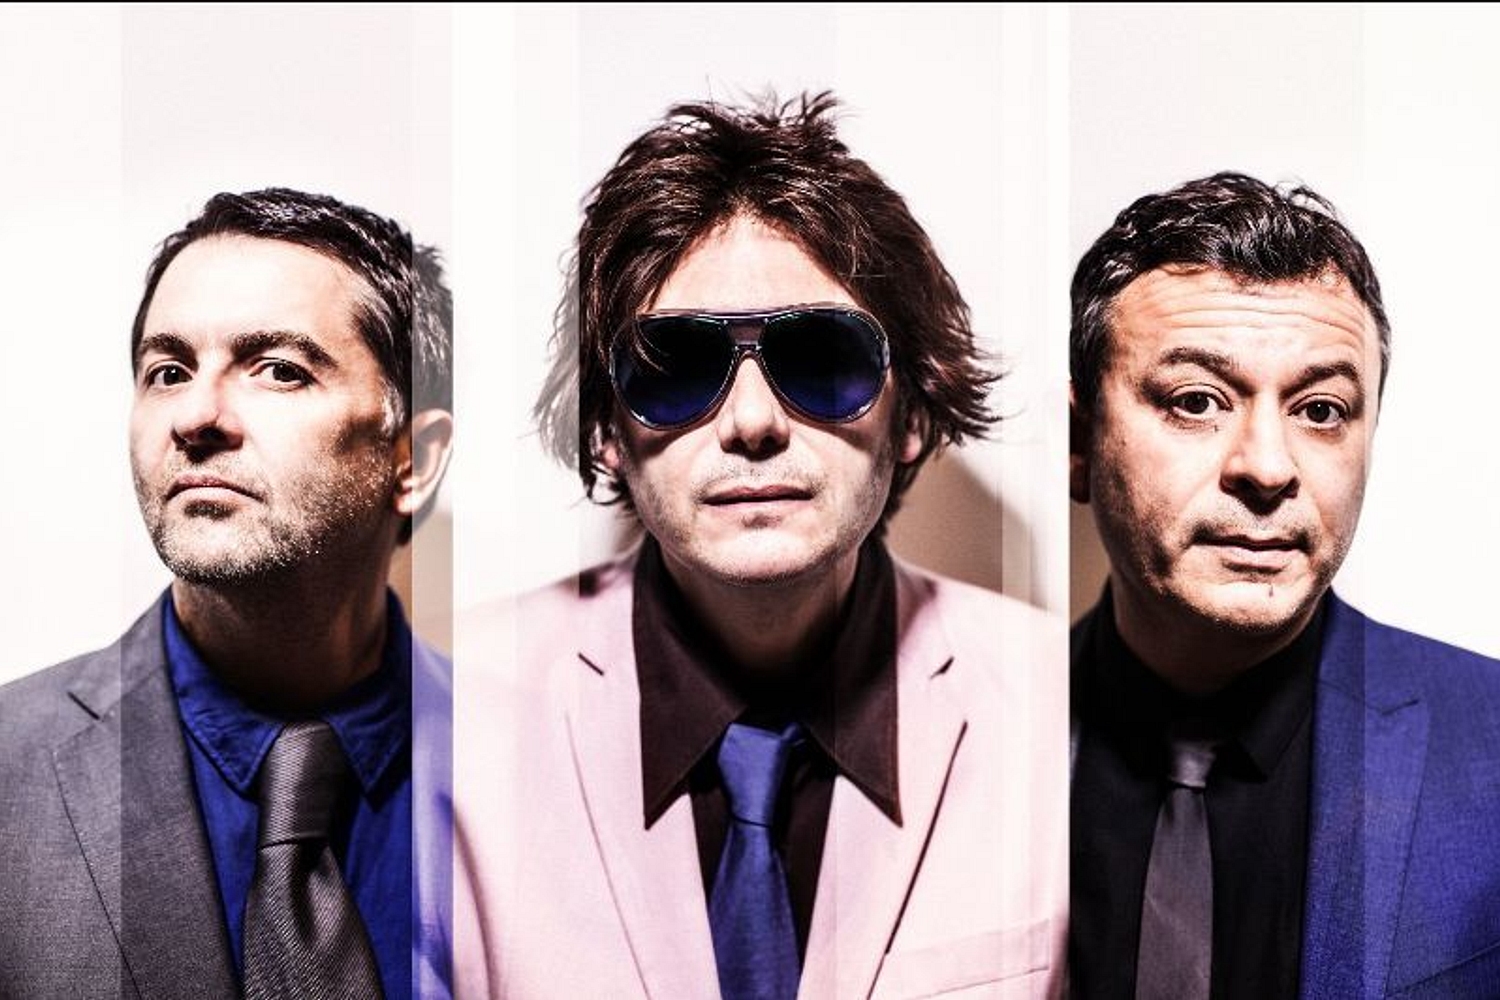 Manic Street Preachers to play two special shows paying tribute to NHS staff